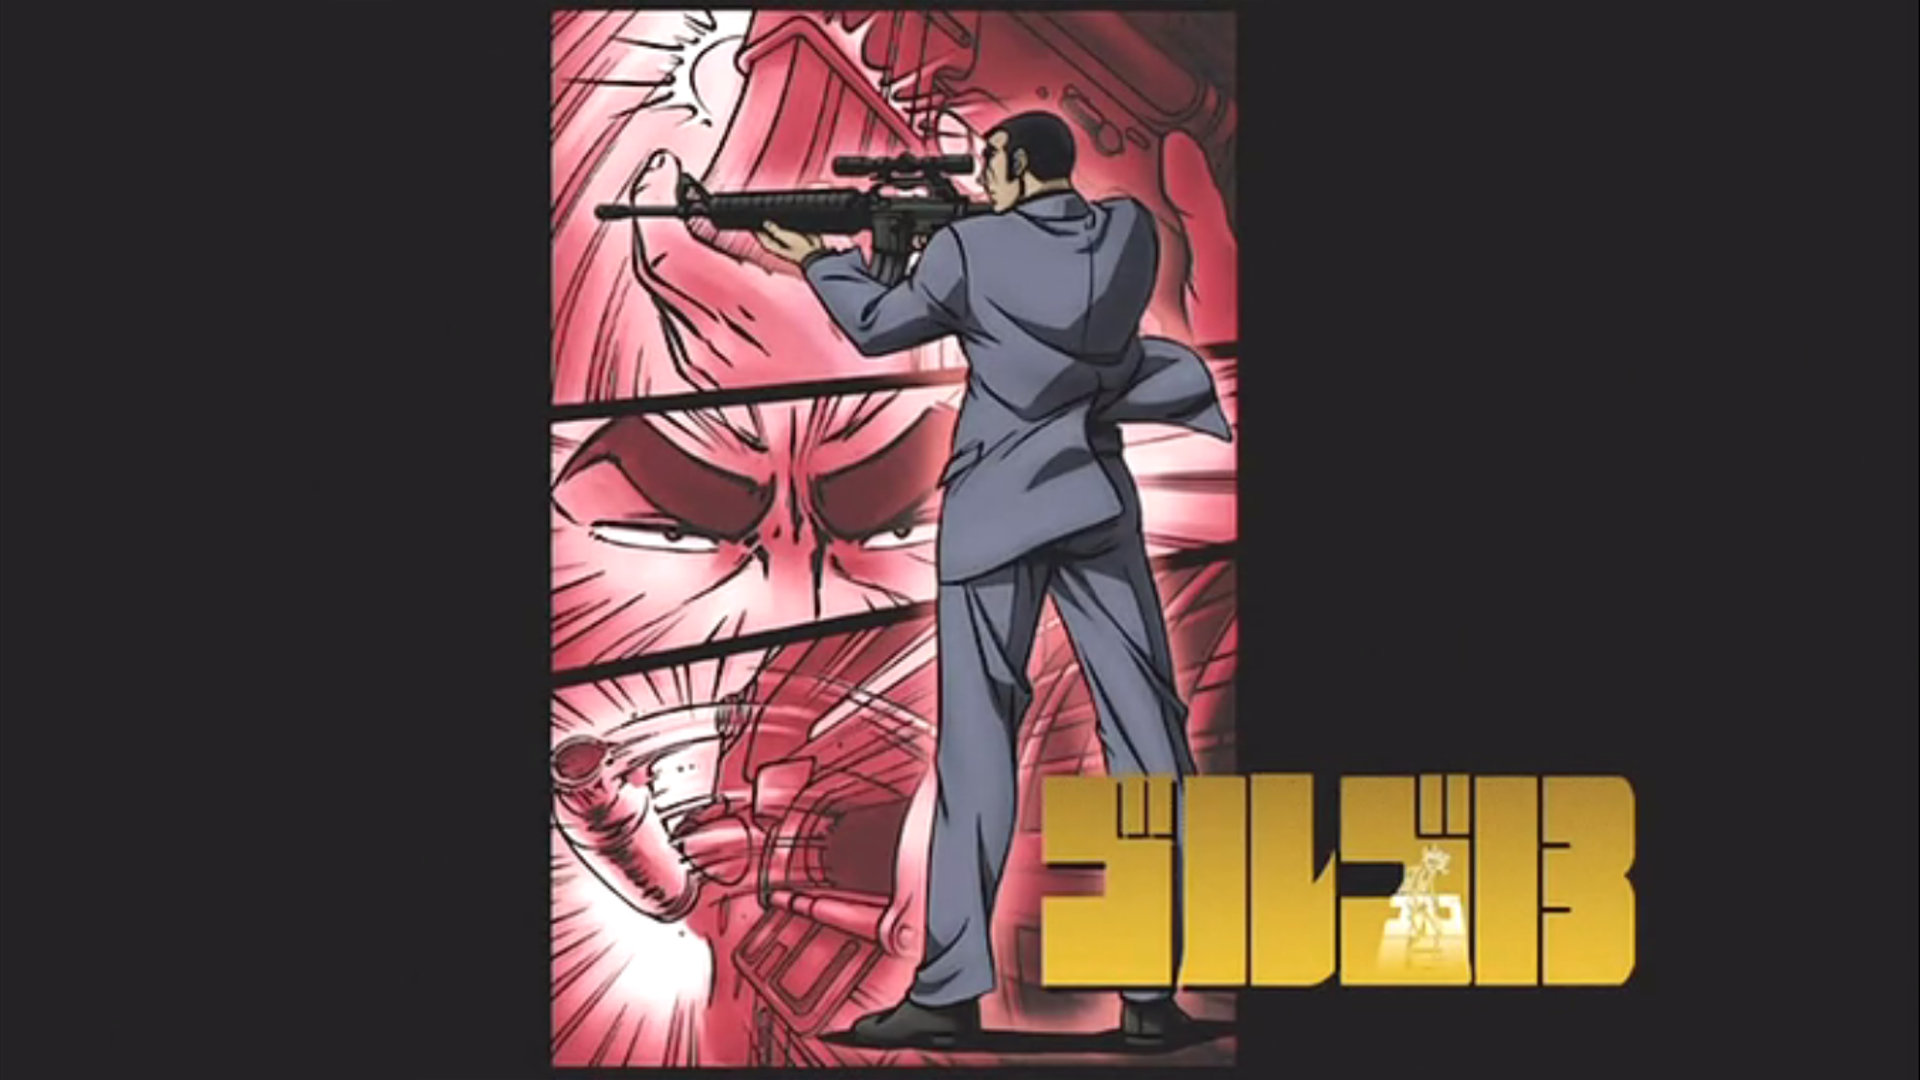 Download 1080p Golgo 13 PC background ID:144537 for free